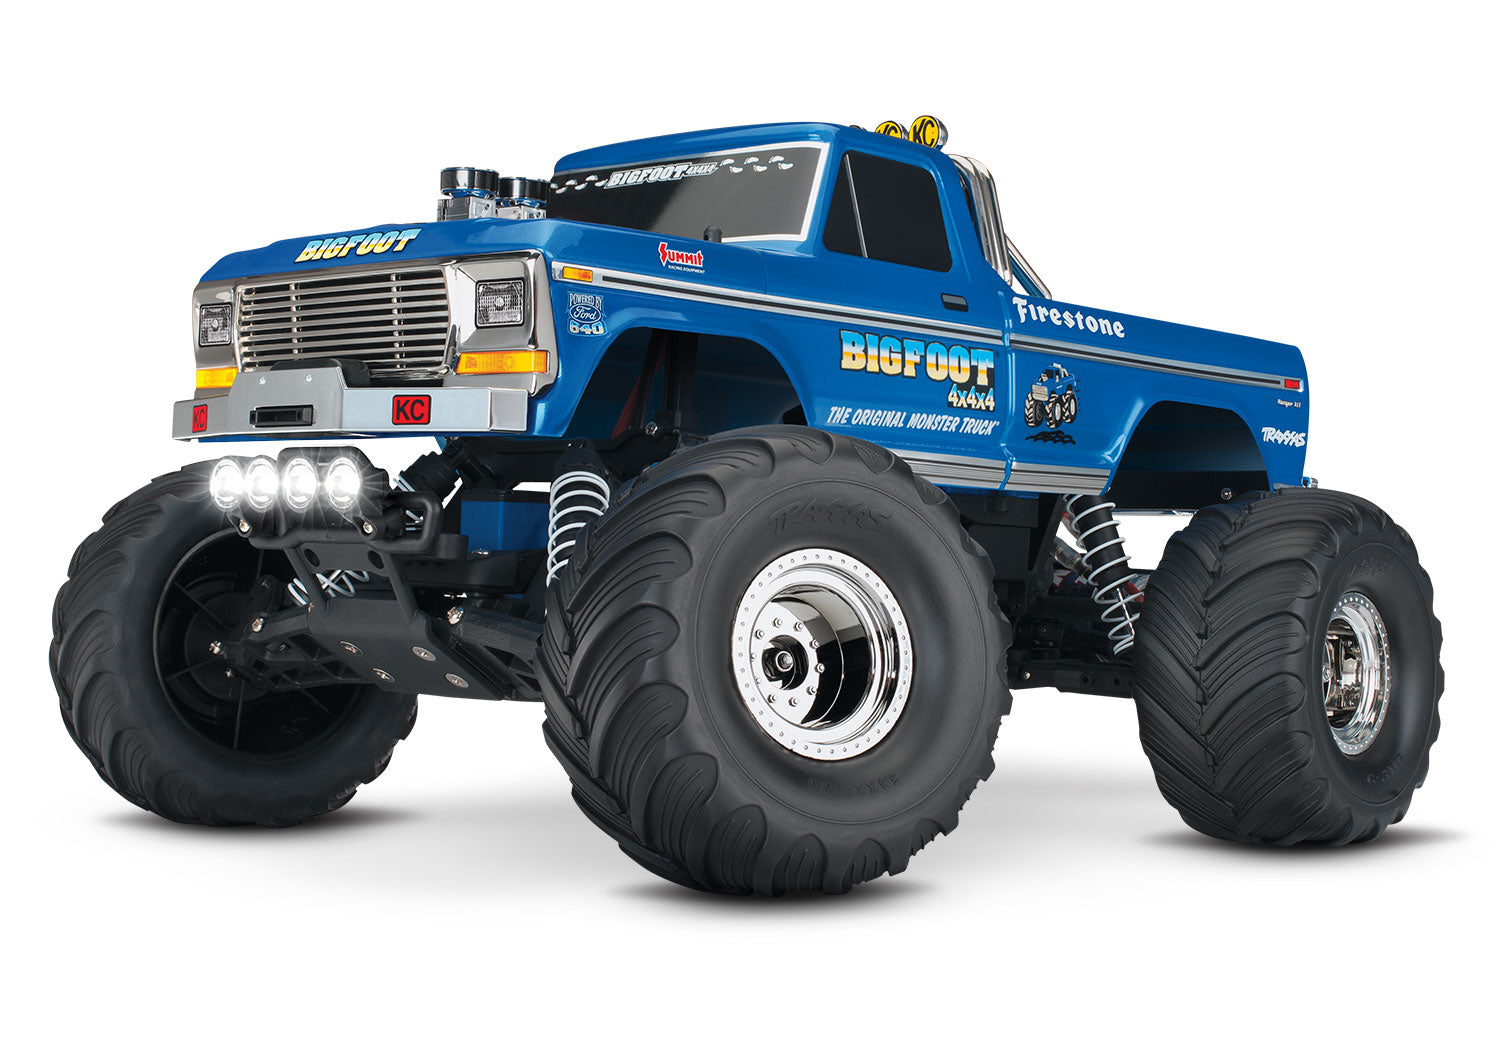 TRAXXAS 36034-61 BIGFOOT® No. 1 1/10 scale 2WD waterproof monster truck. RTR, with TQ™ 2.4GHz radio system, 8.4V NiMH 3000 mAh battery, 4-amp DC Peak Detecting Fast Charger, LED lighting, painted body.